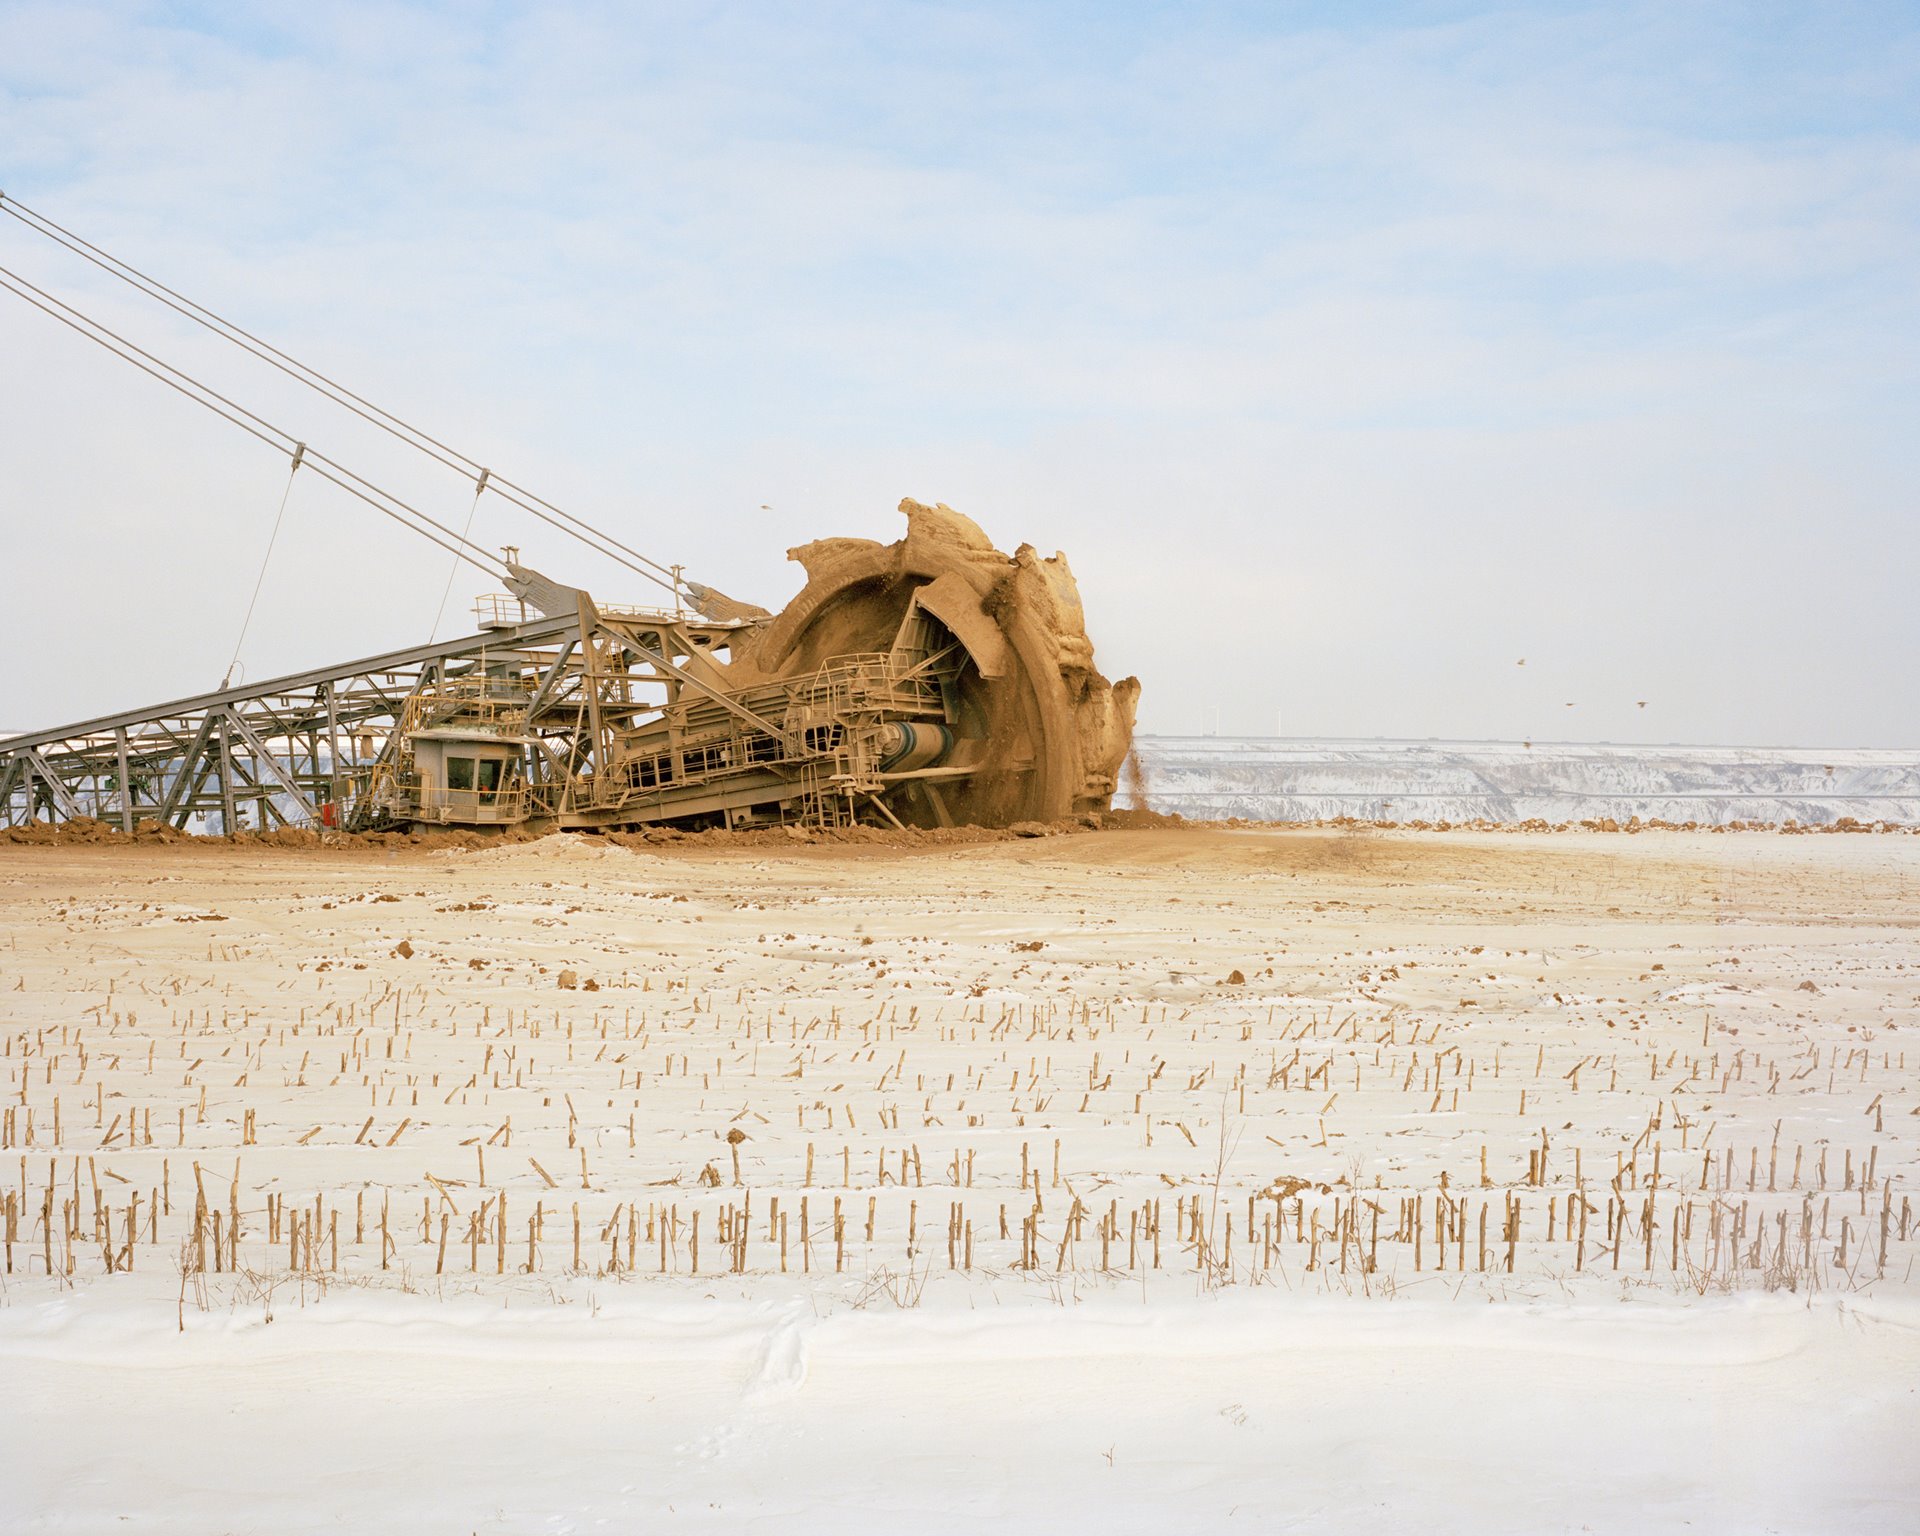 A bucket-wheel excavator digs through a field where corn used to be grown, near the village of Lützerath, in Germany. The machine is enlarging the Garzweiler II opencast mine, which stretches over more than five kilometers. The loess soils in the region are among the most fertile in Germany.